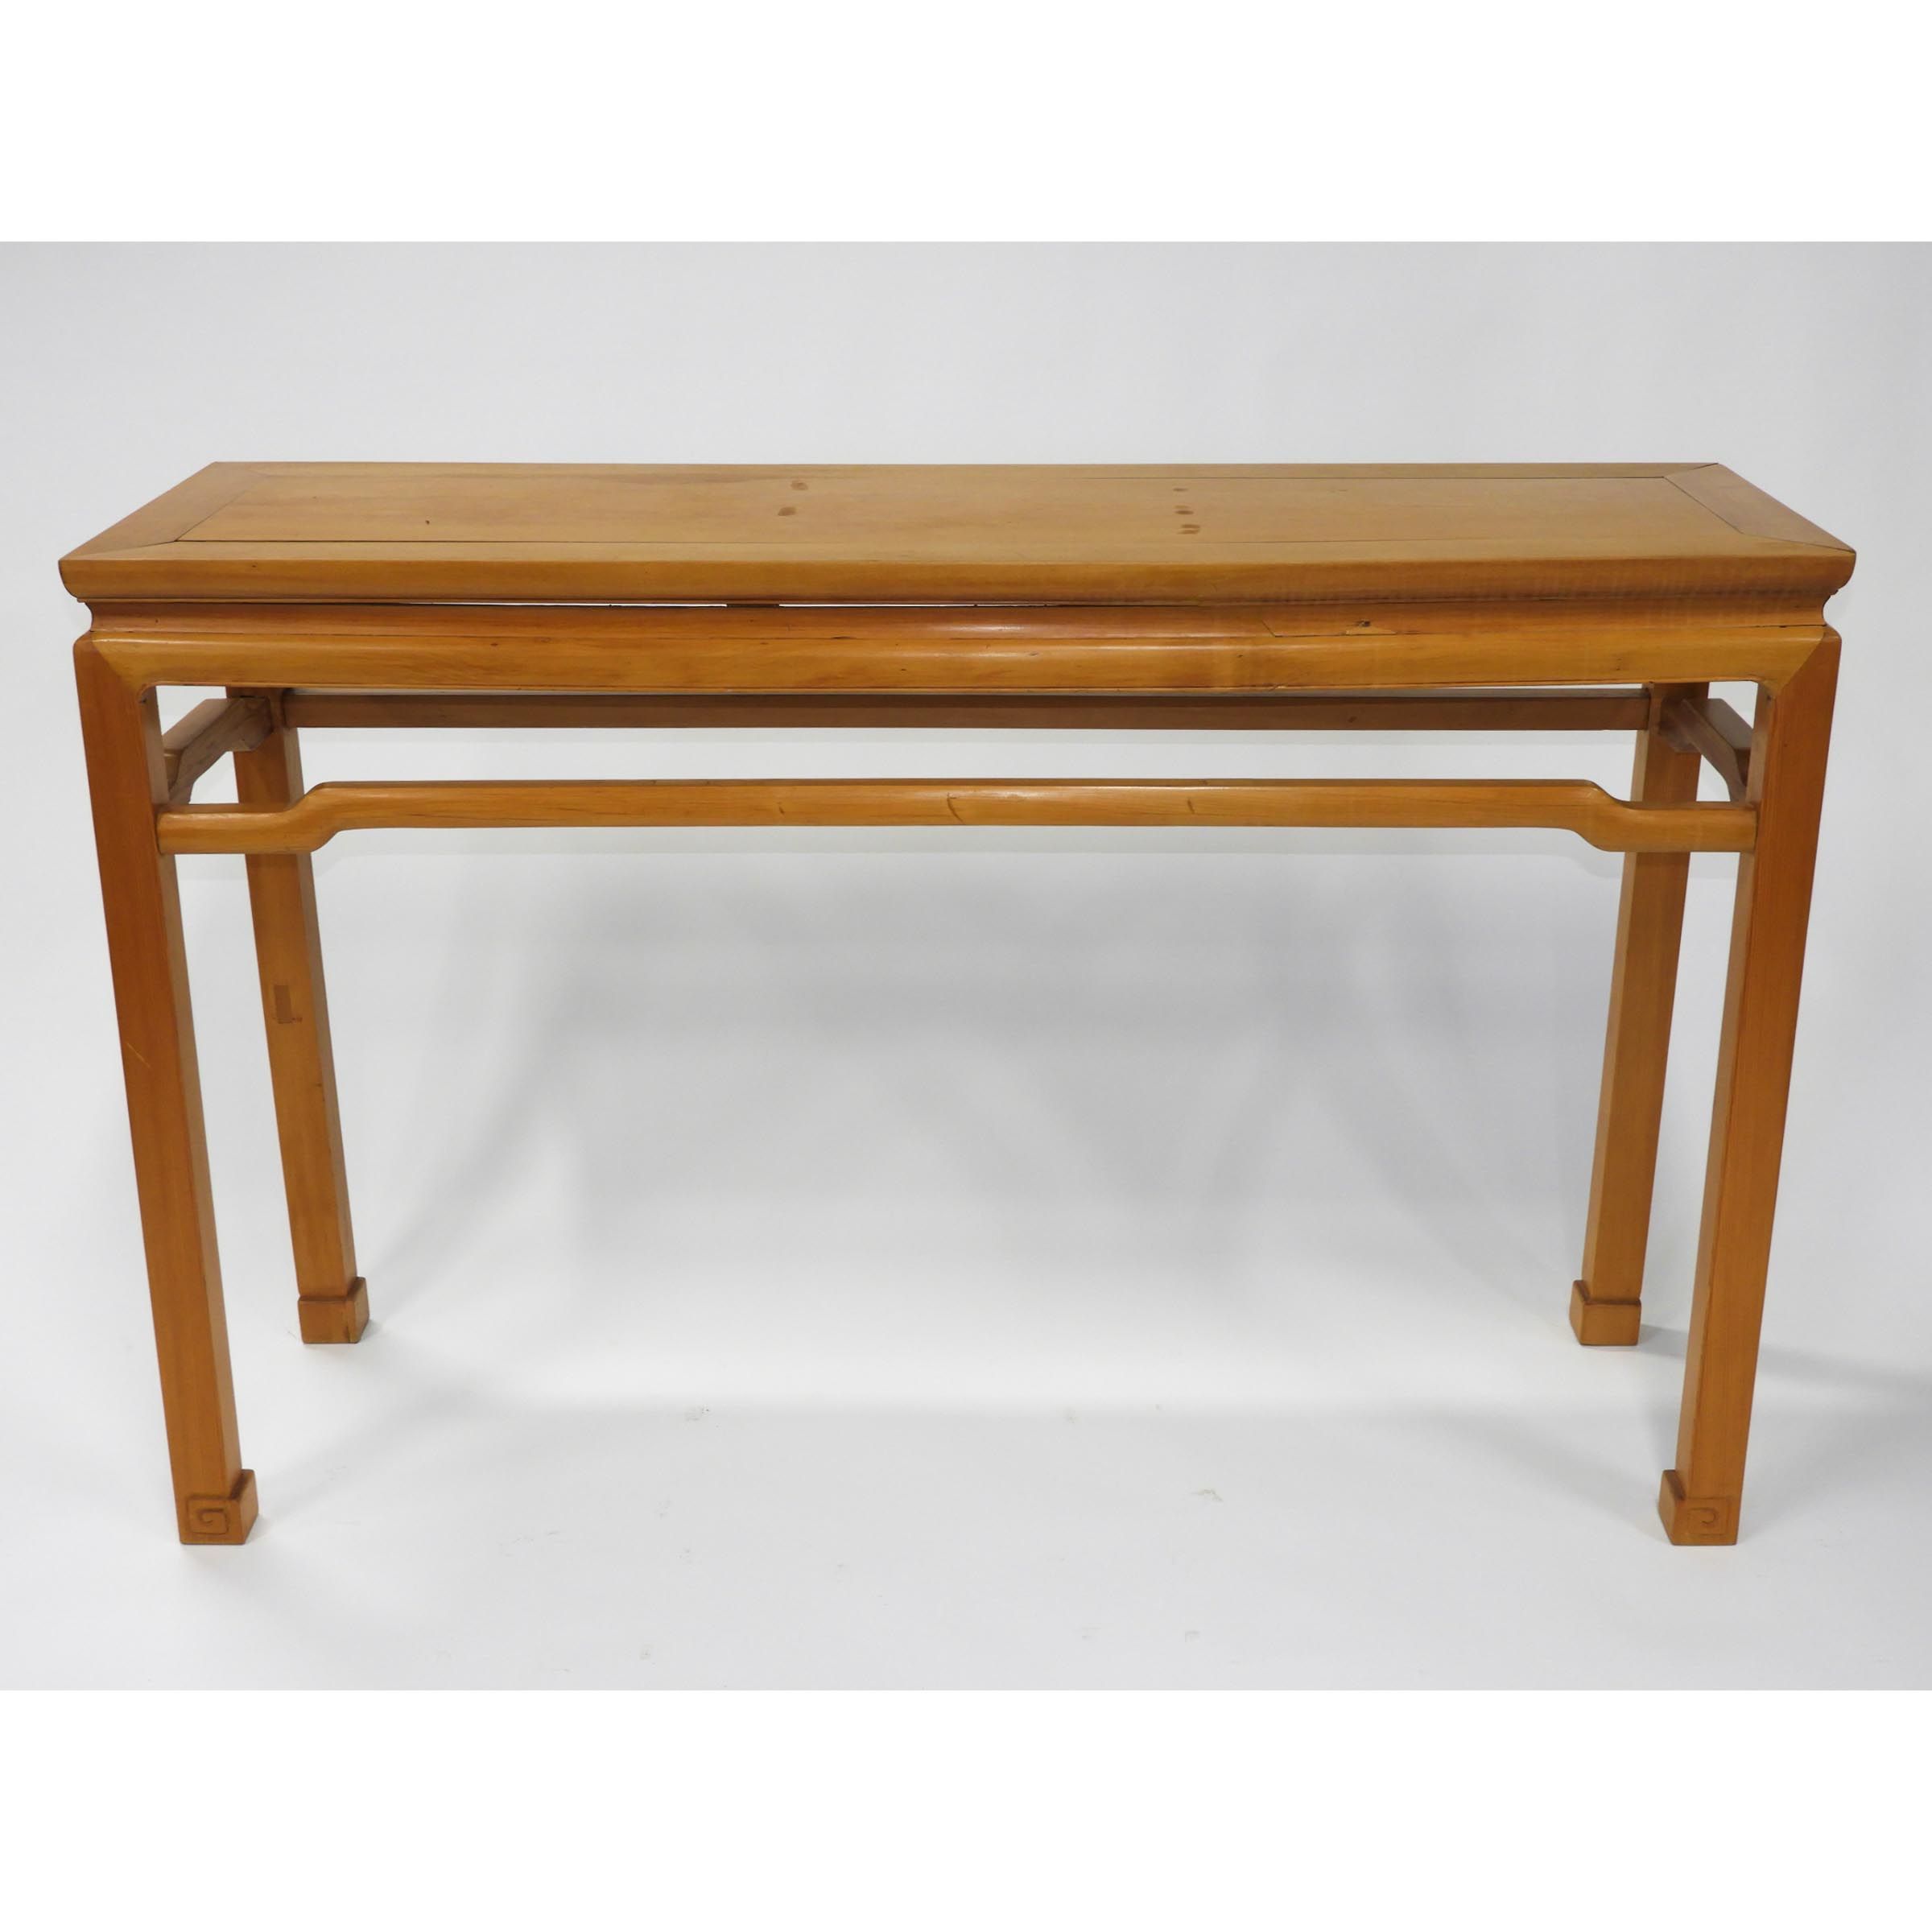 A Chinese Elmwood Altar Table